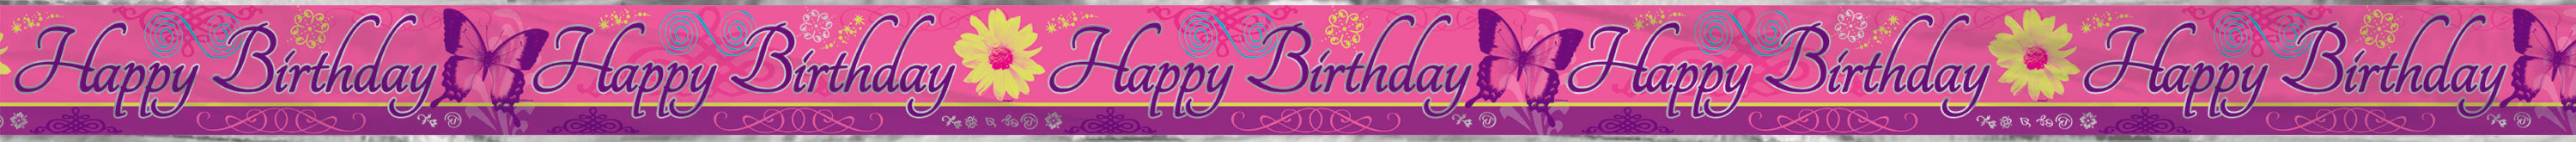 Butterfly Chic Happy Birthday Foil Banner - 3.6m